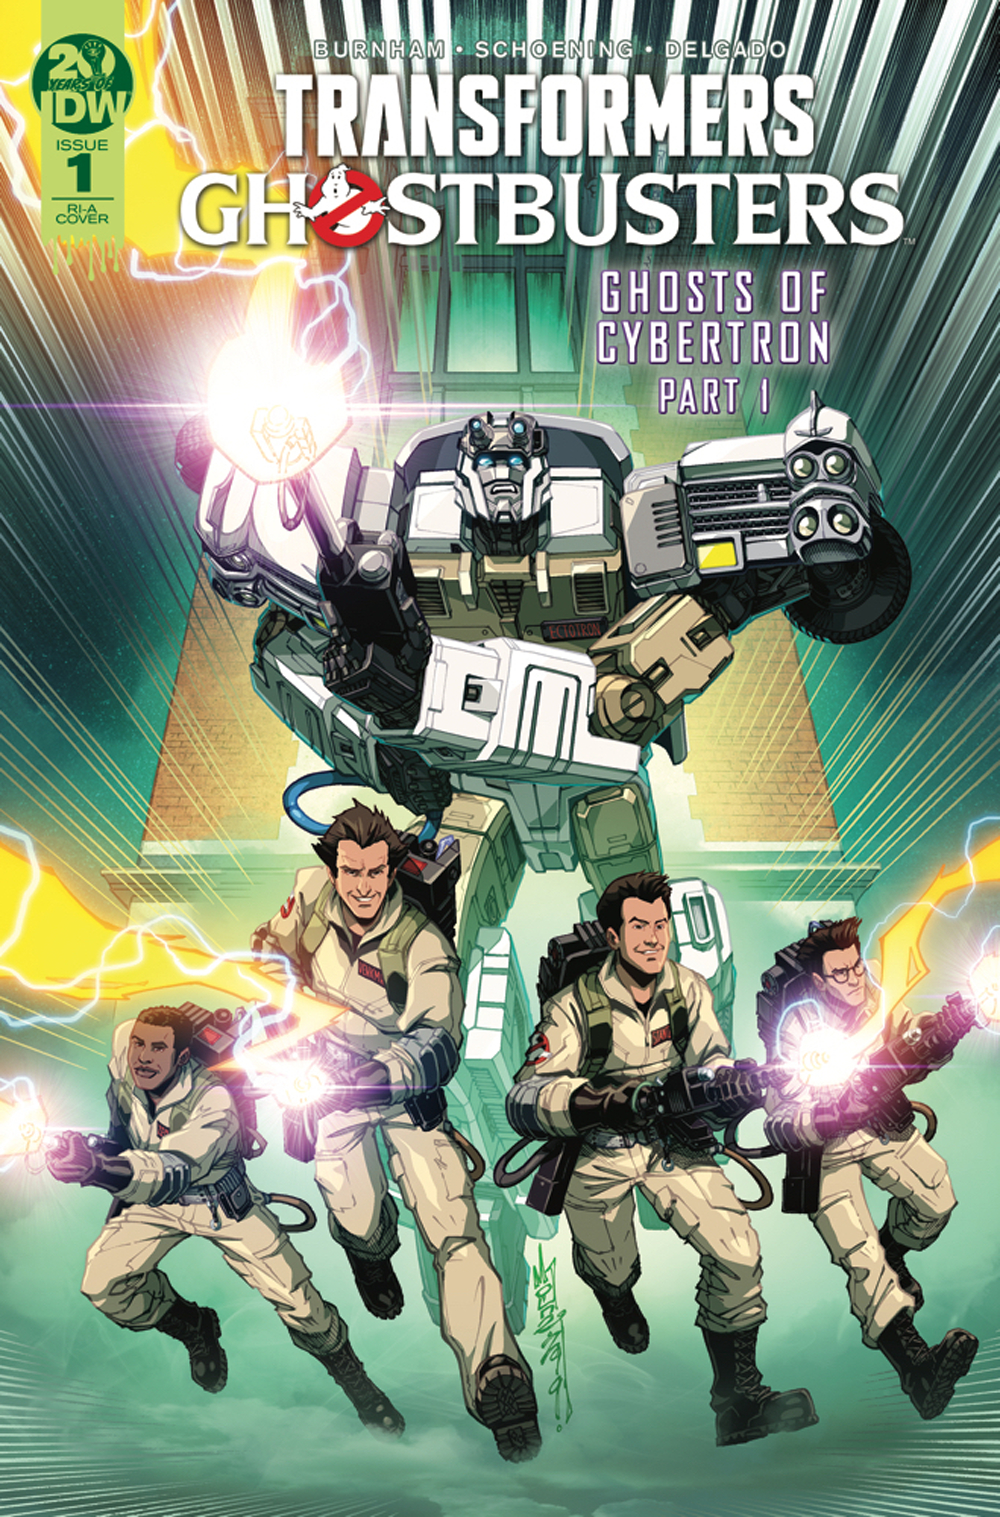 Transformers News: Re: IDW Transformers x Ghostbusters Comic Discussion